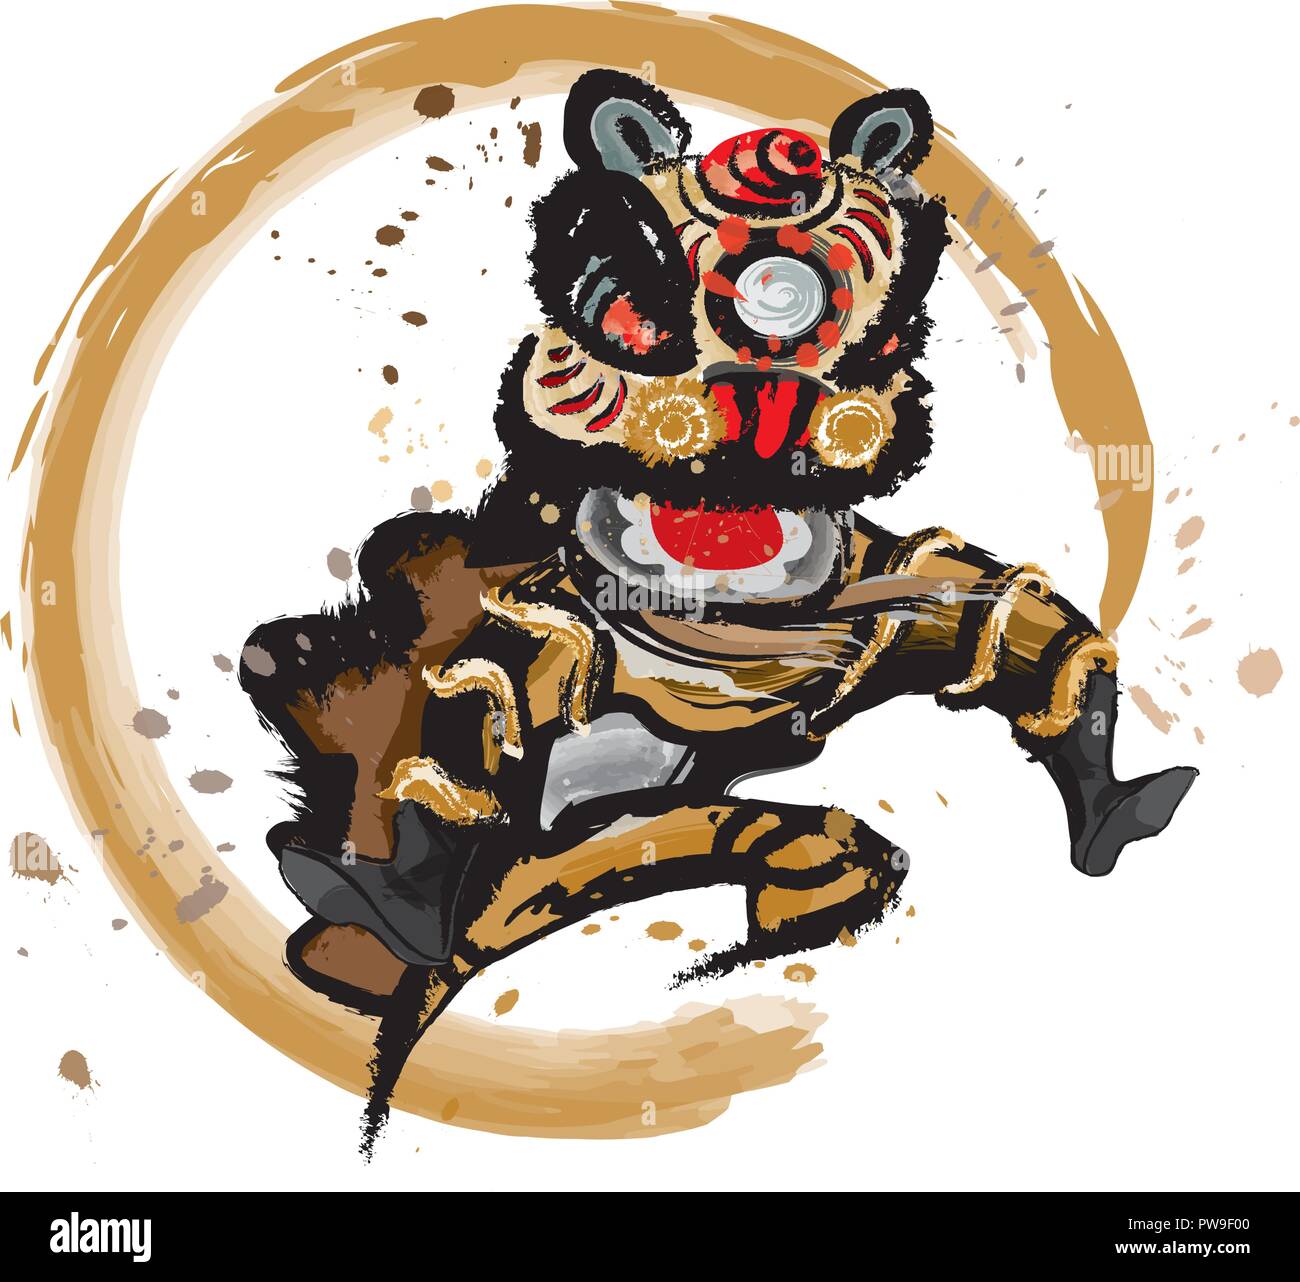 A jumping Chinese lion in various colors and presented in splashing ink drawing style. Stock Vector